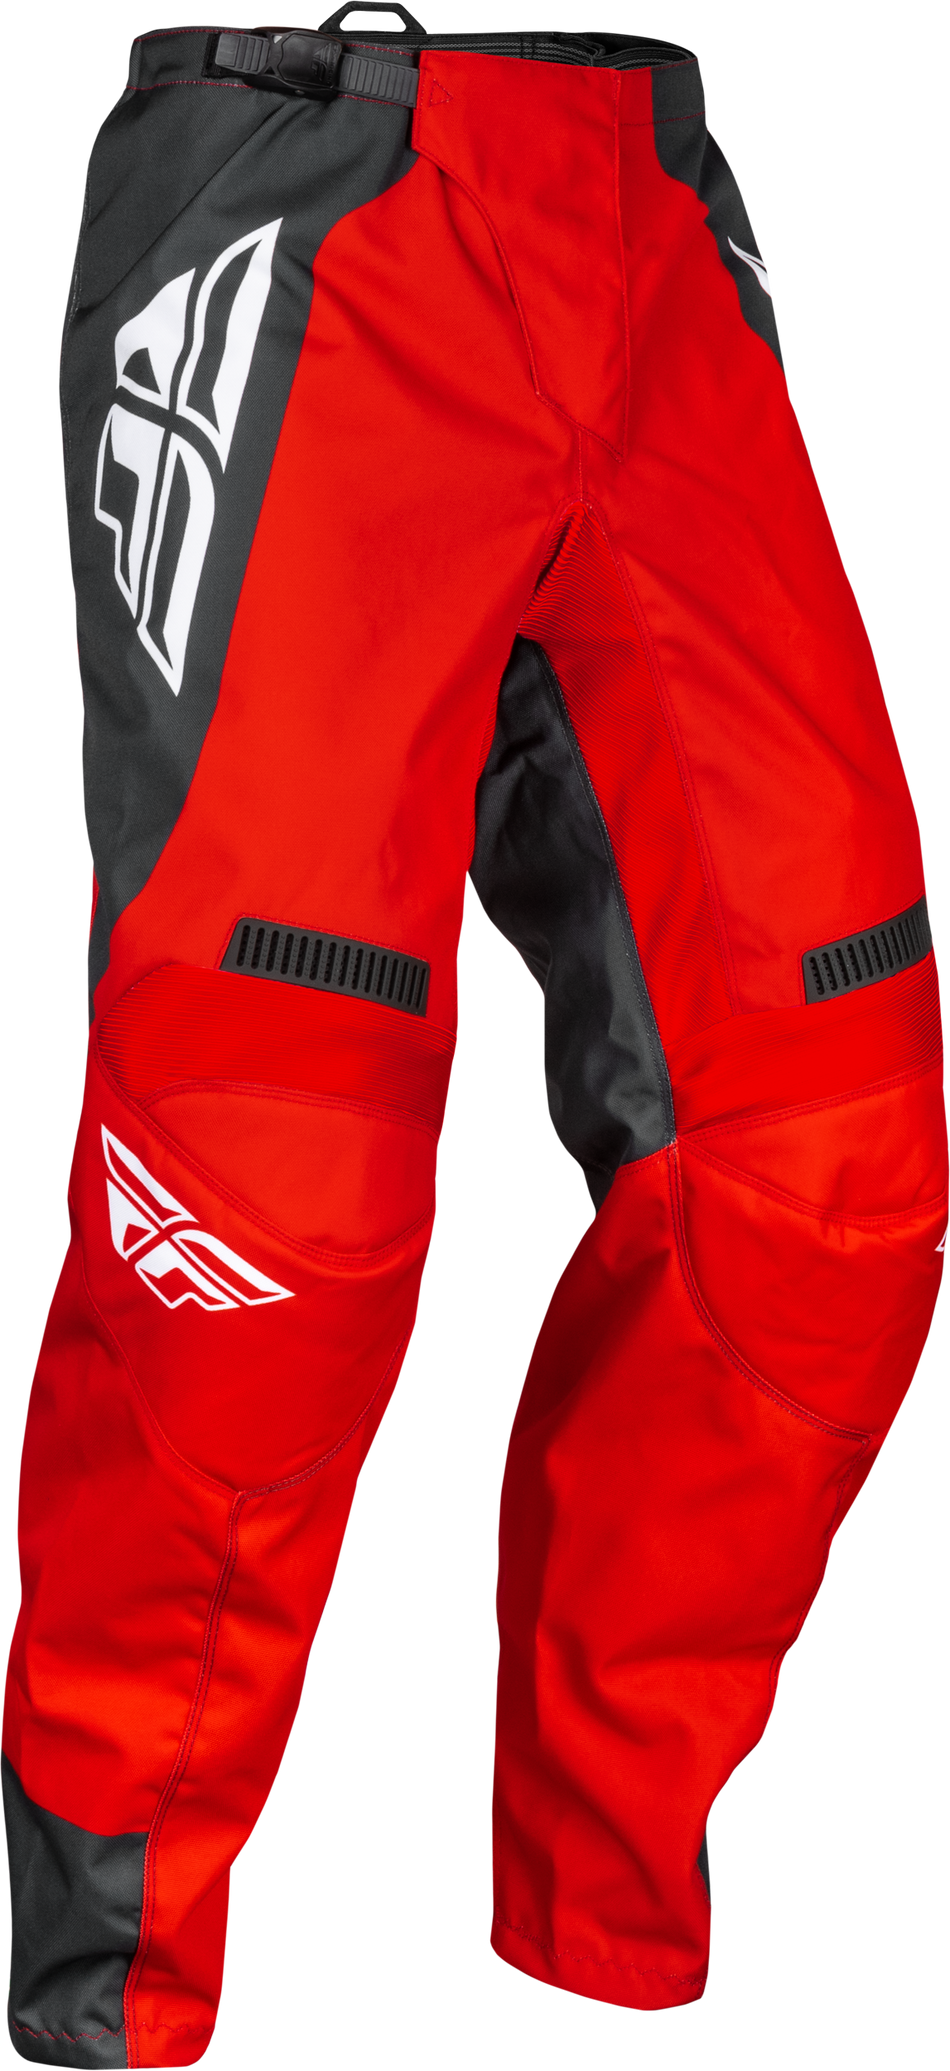 FLY RACING F-16 Pants Red/Charcoal/White Sz 40 377-93340